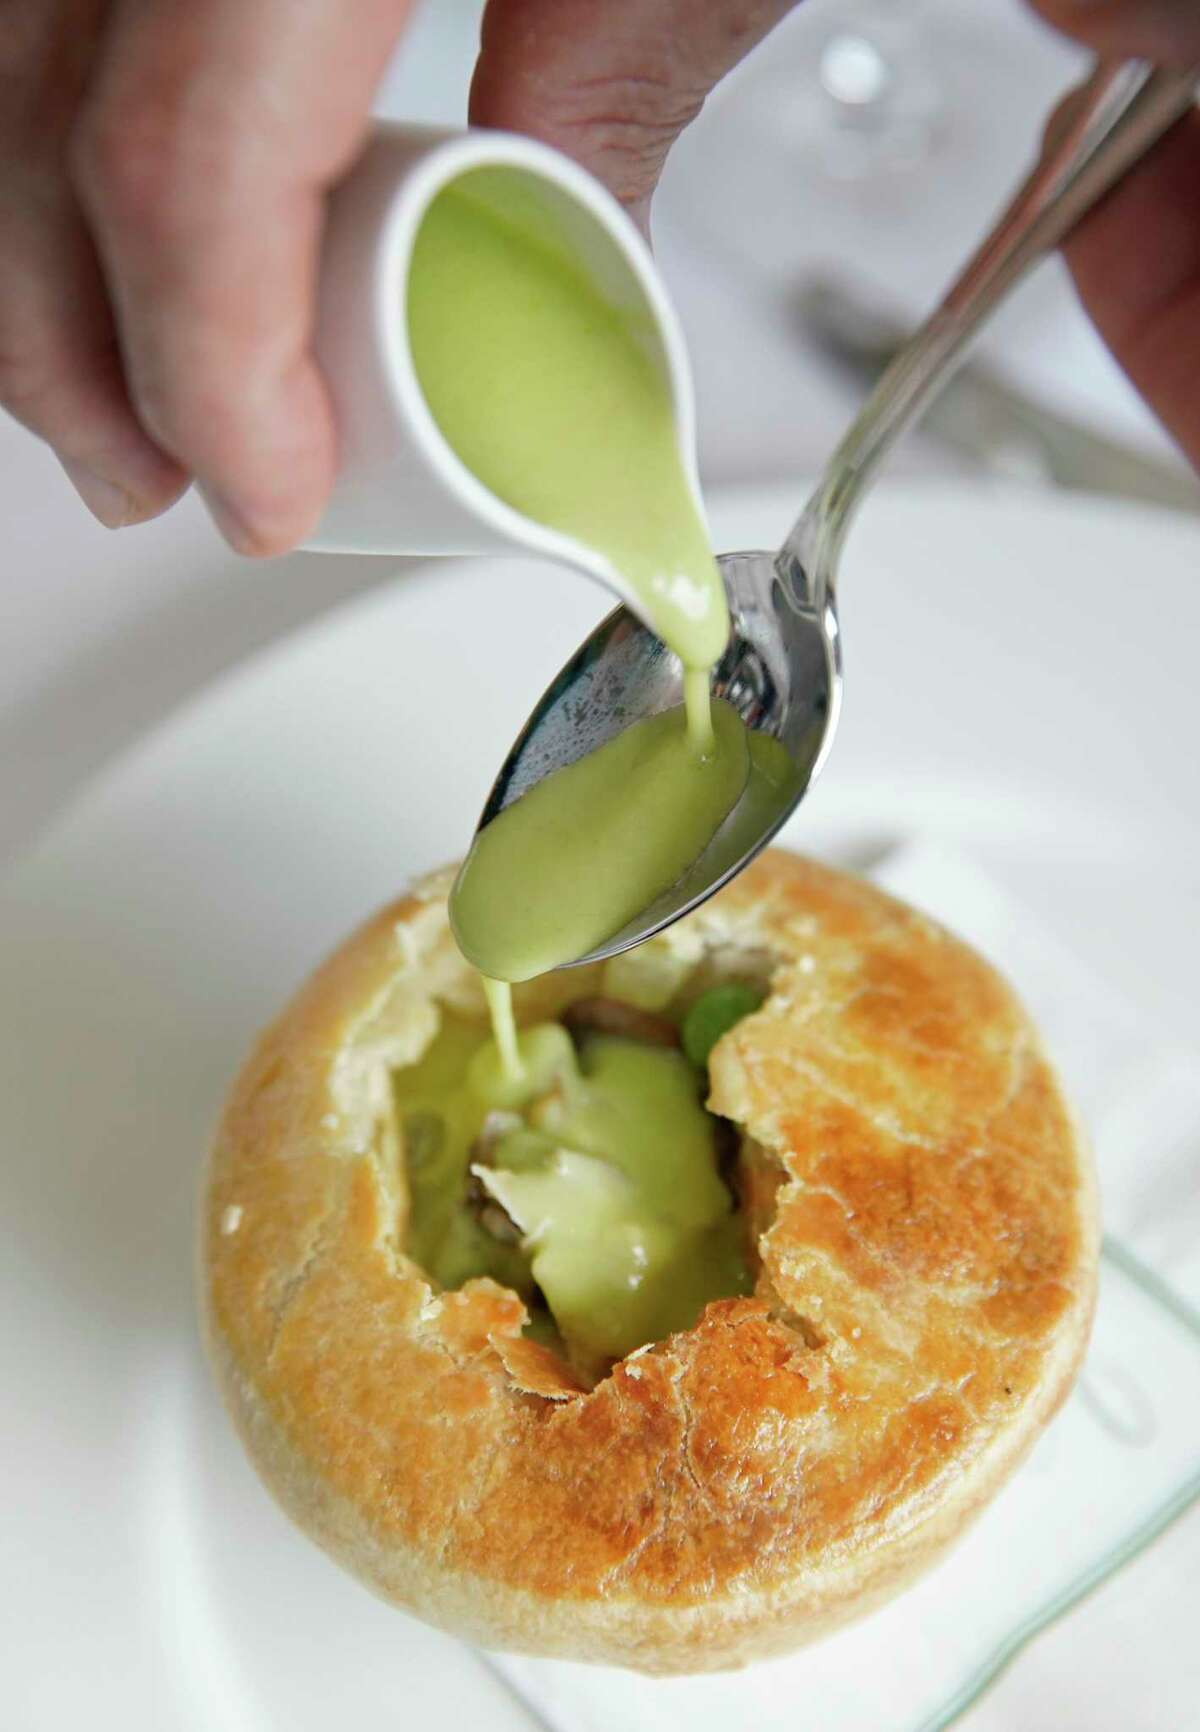 The finishing touch is added tableside to the rabbit pot pie at The Annie Cafe & Bar.